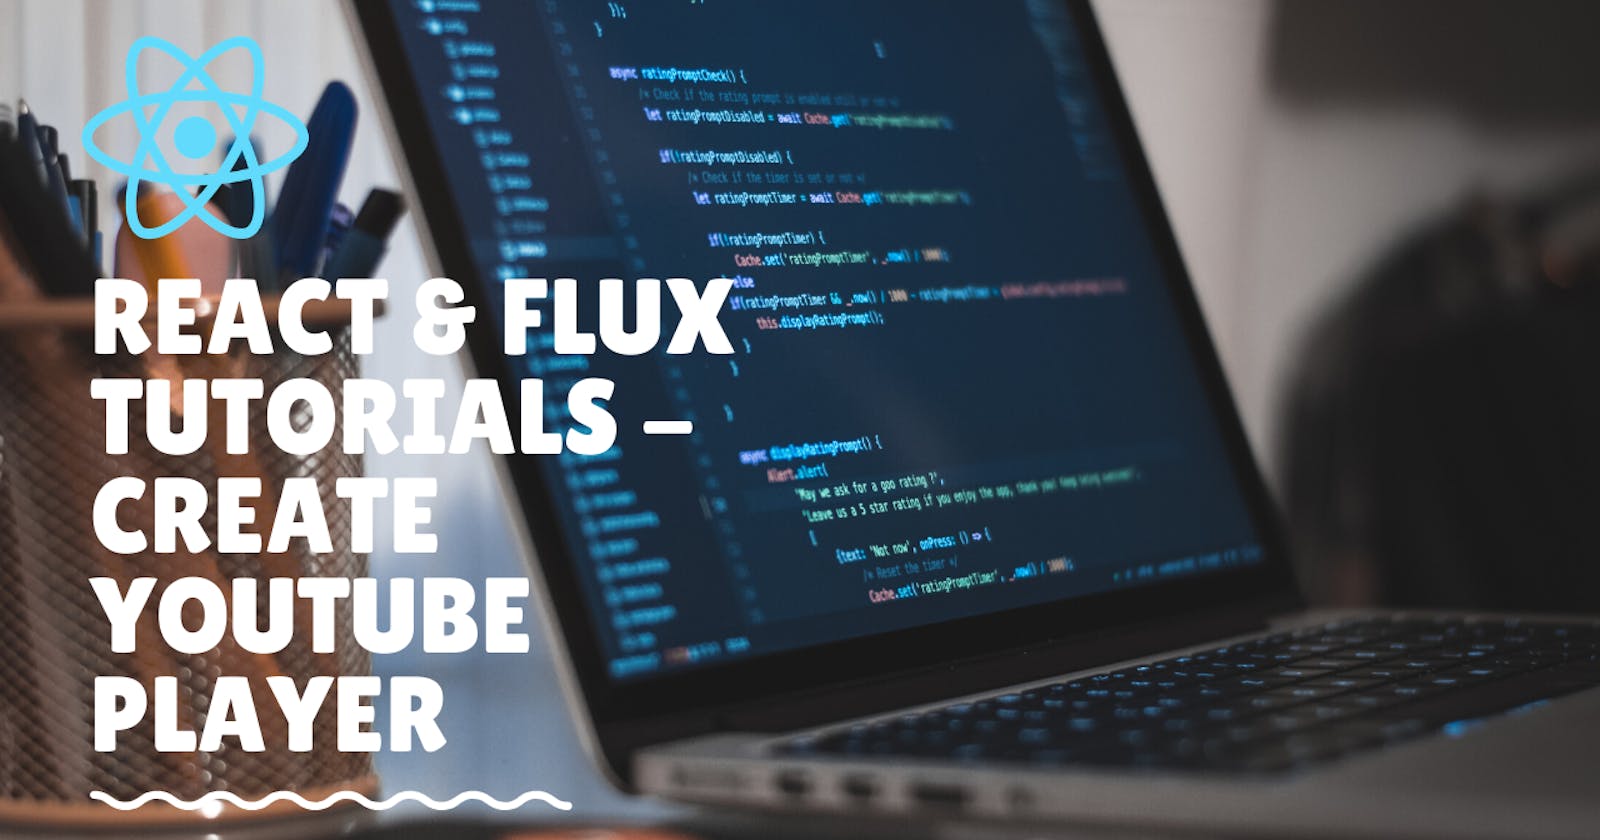 Refactoring Youtube Player to use Flux — Part 1